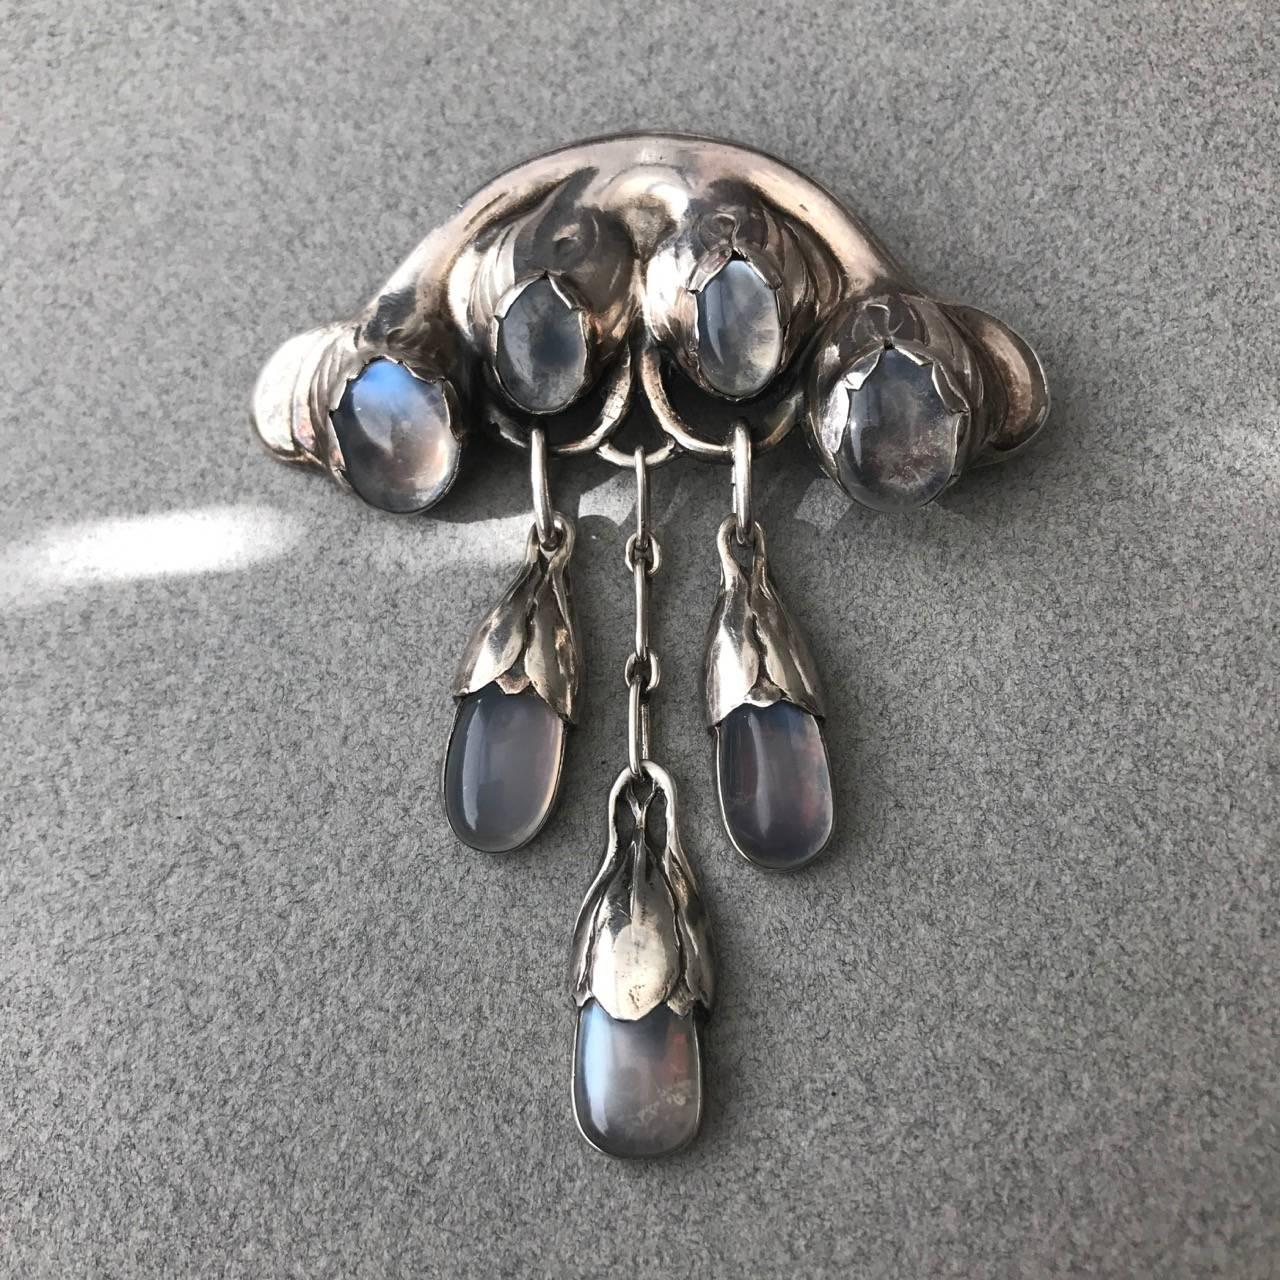 Evald Nielsen 830 Master Brooch with Moonstones
Complimentary gift box included with purchase.

An excellent example of a very large silver and moonstone master brooch by Evald Nielsen. Throughout his life Evald Nielsen was characterized by highly